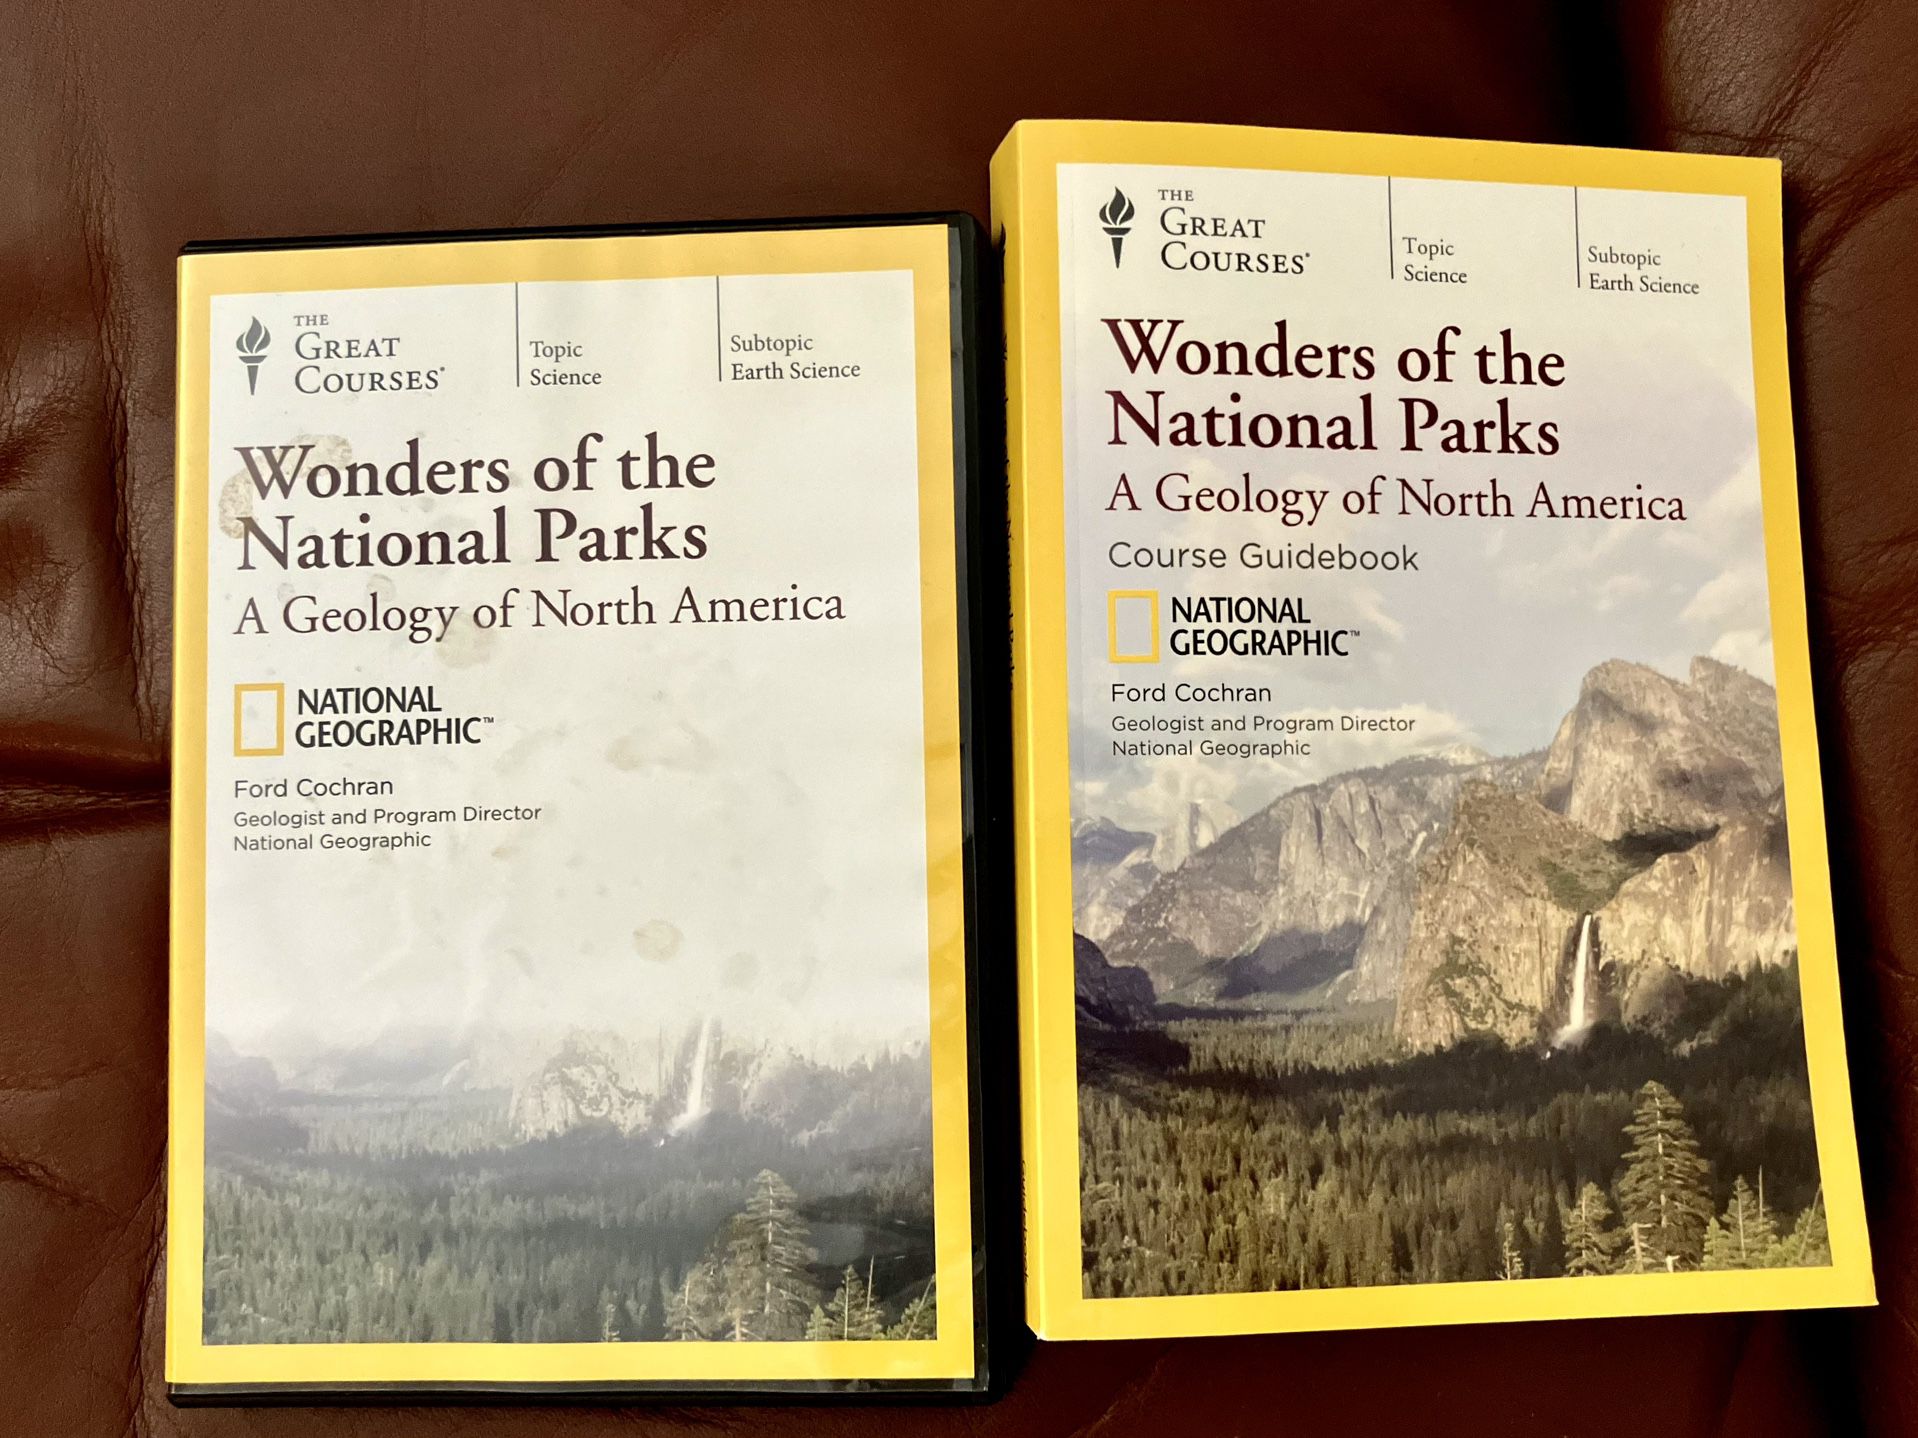 DVD  “Wonders of the National Parks”